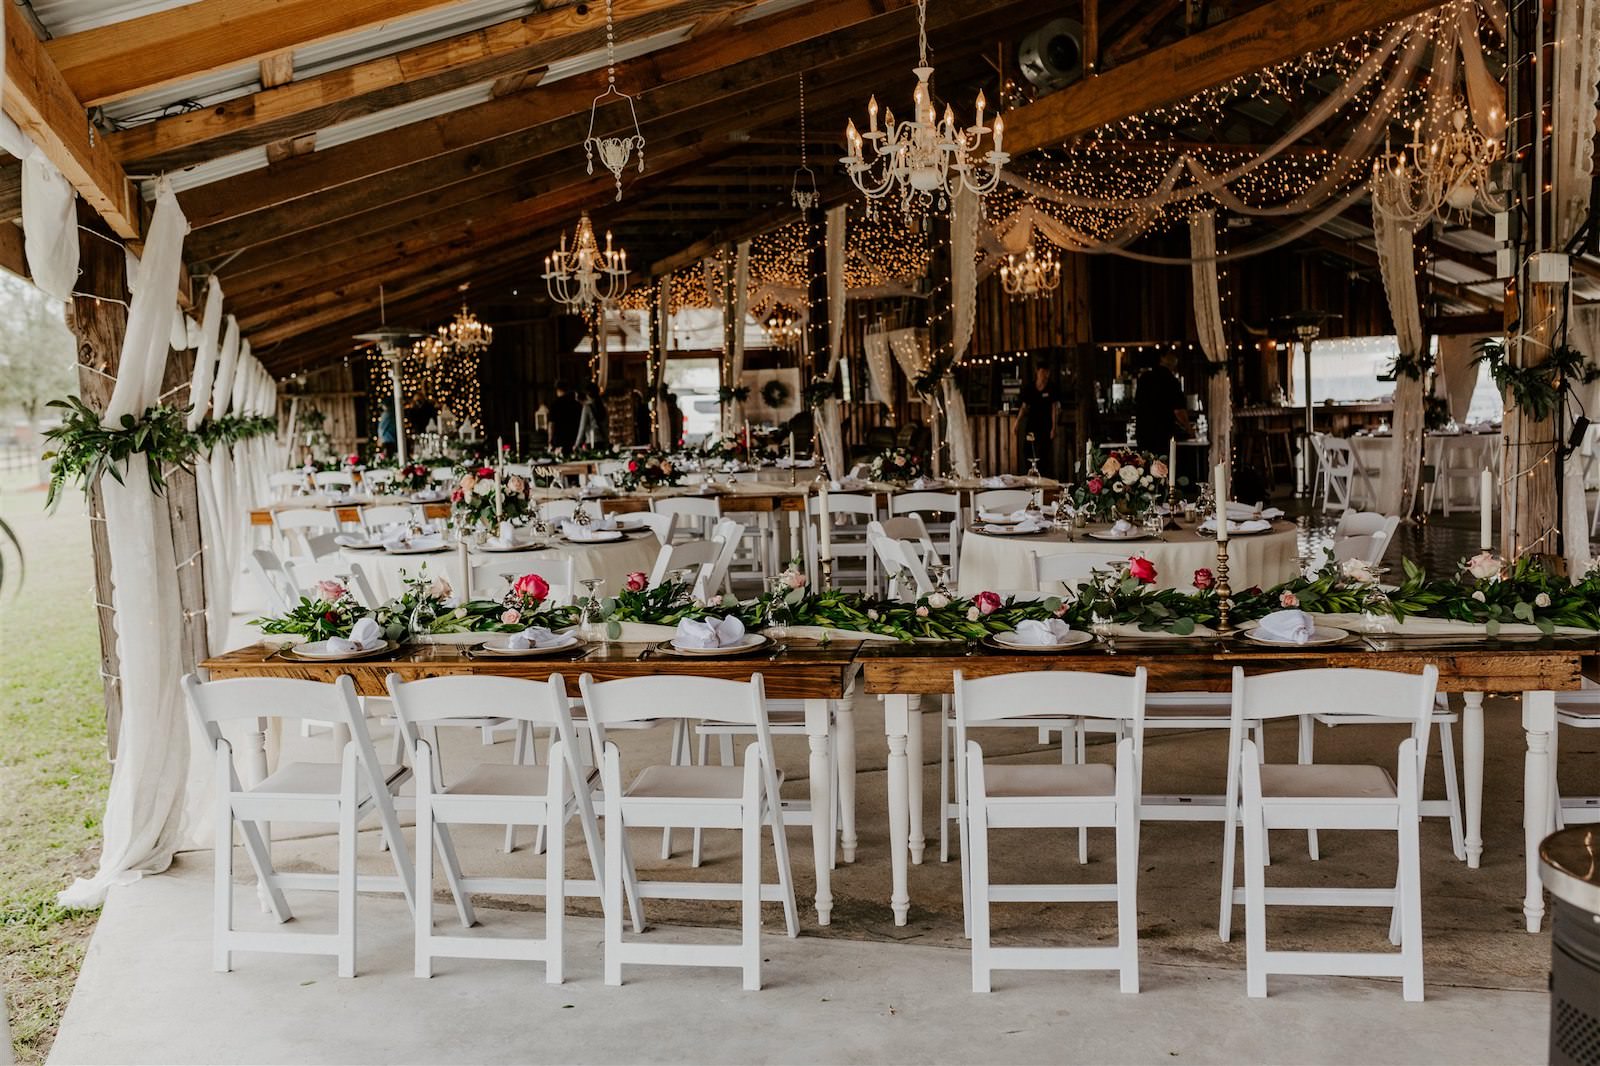 Rustic Barn Tampa Wedding with Twinkle Lights and Chandeliers | Garland Centerpieces with Blush Pink and Deep Red Burgundy Roses and Greenery | Wood Farm Tables with Champagne Linen Runners and Taper Candlestick Candles and White Garden Chairs | Tampa Wedding Florist Monarch Events and Designs